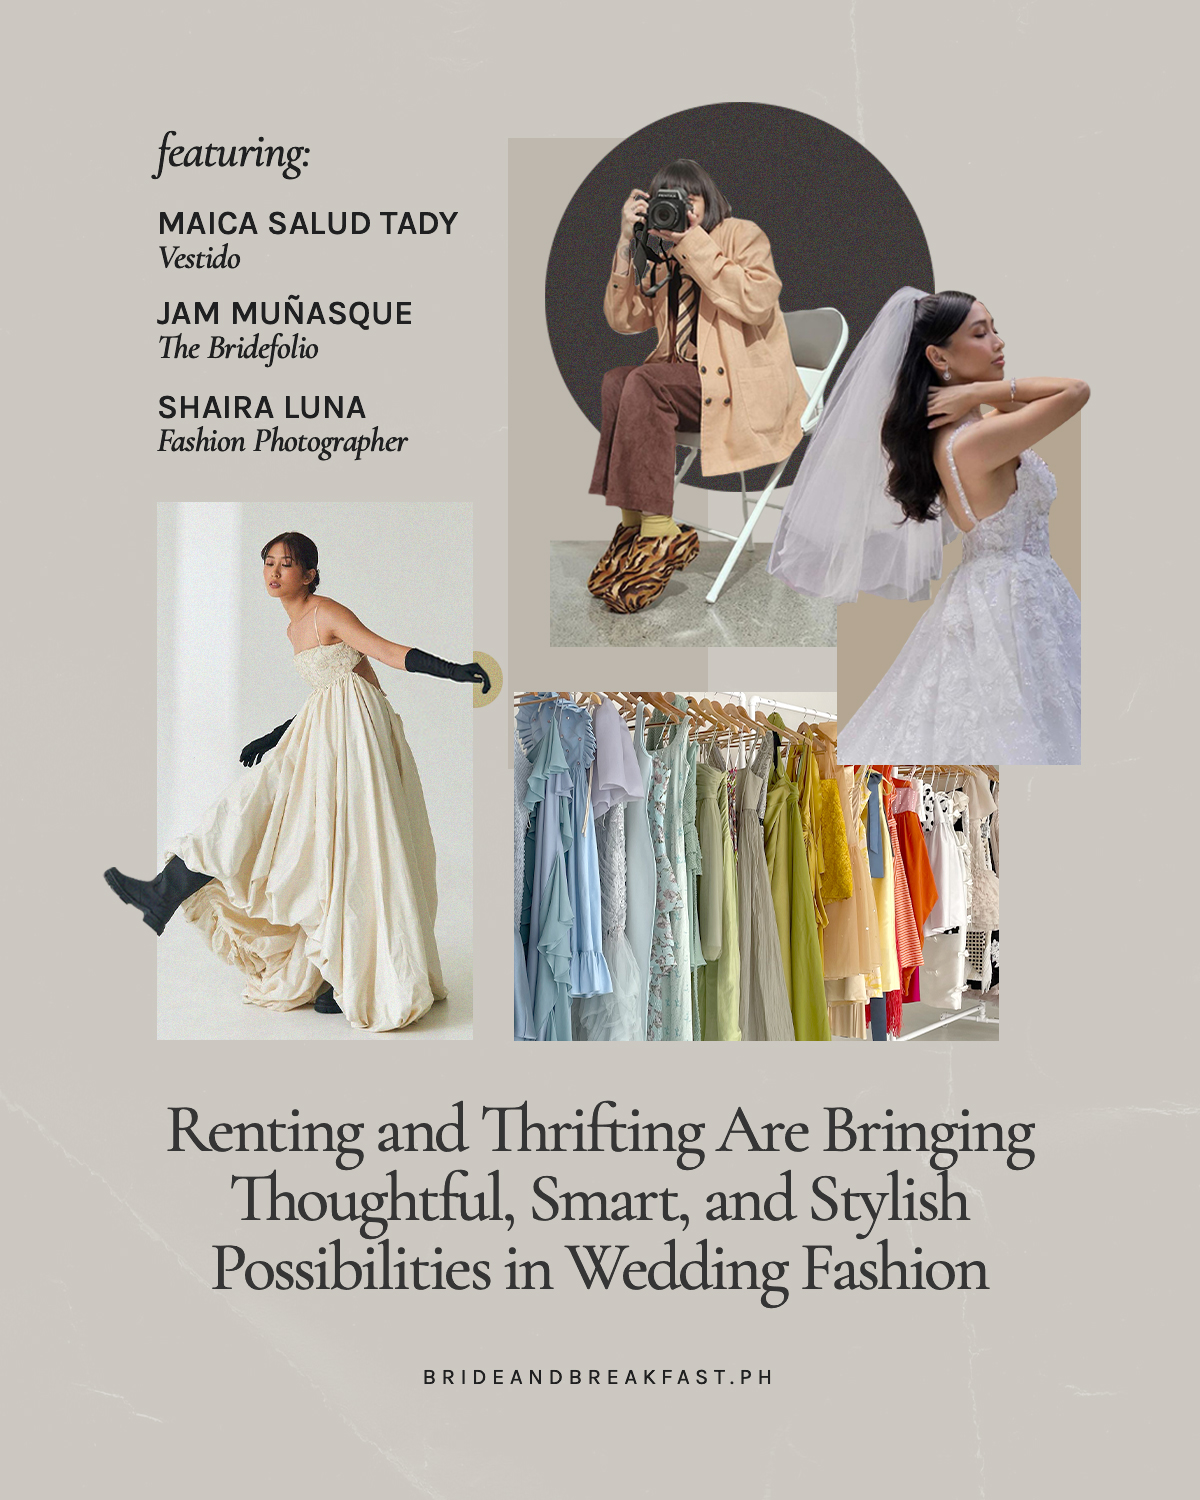 Renting and Thrifting Are Bringing Thoughtful, Smart, and Stylish Possibilities in Wedding Fashion